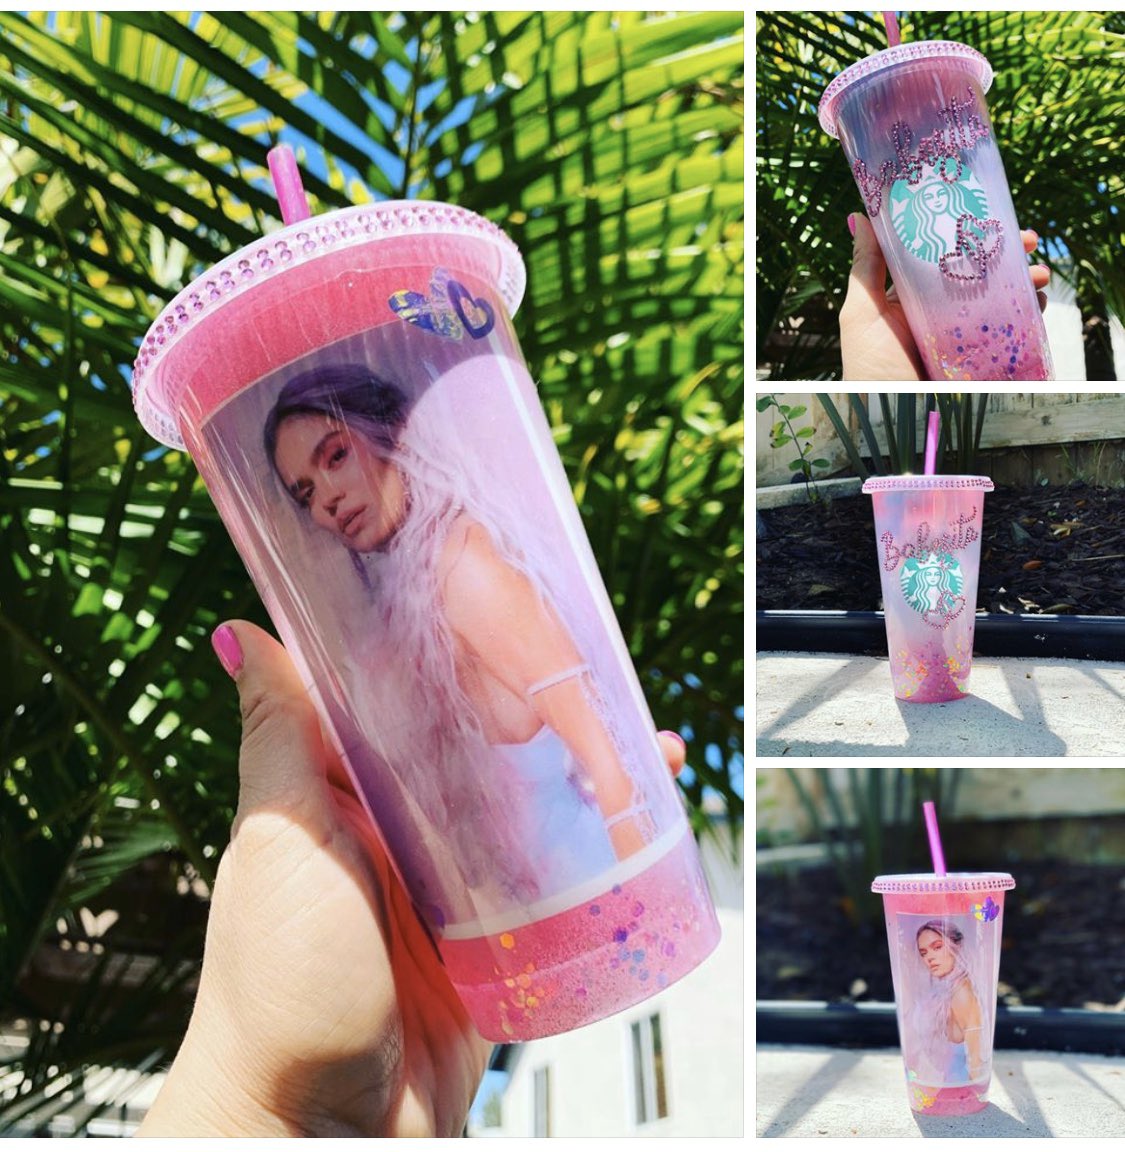 mandas craft designs on X: Babesita 💕 New Karol G cup. Check out my  Instagram @mandascraftdesigns for this and other beautifully designed cups.   / X